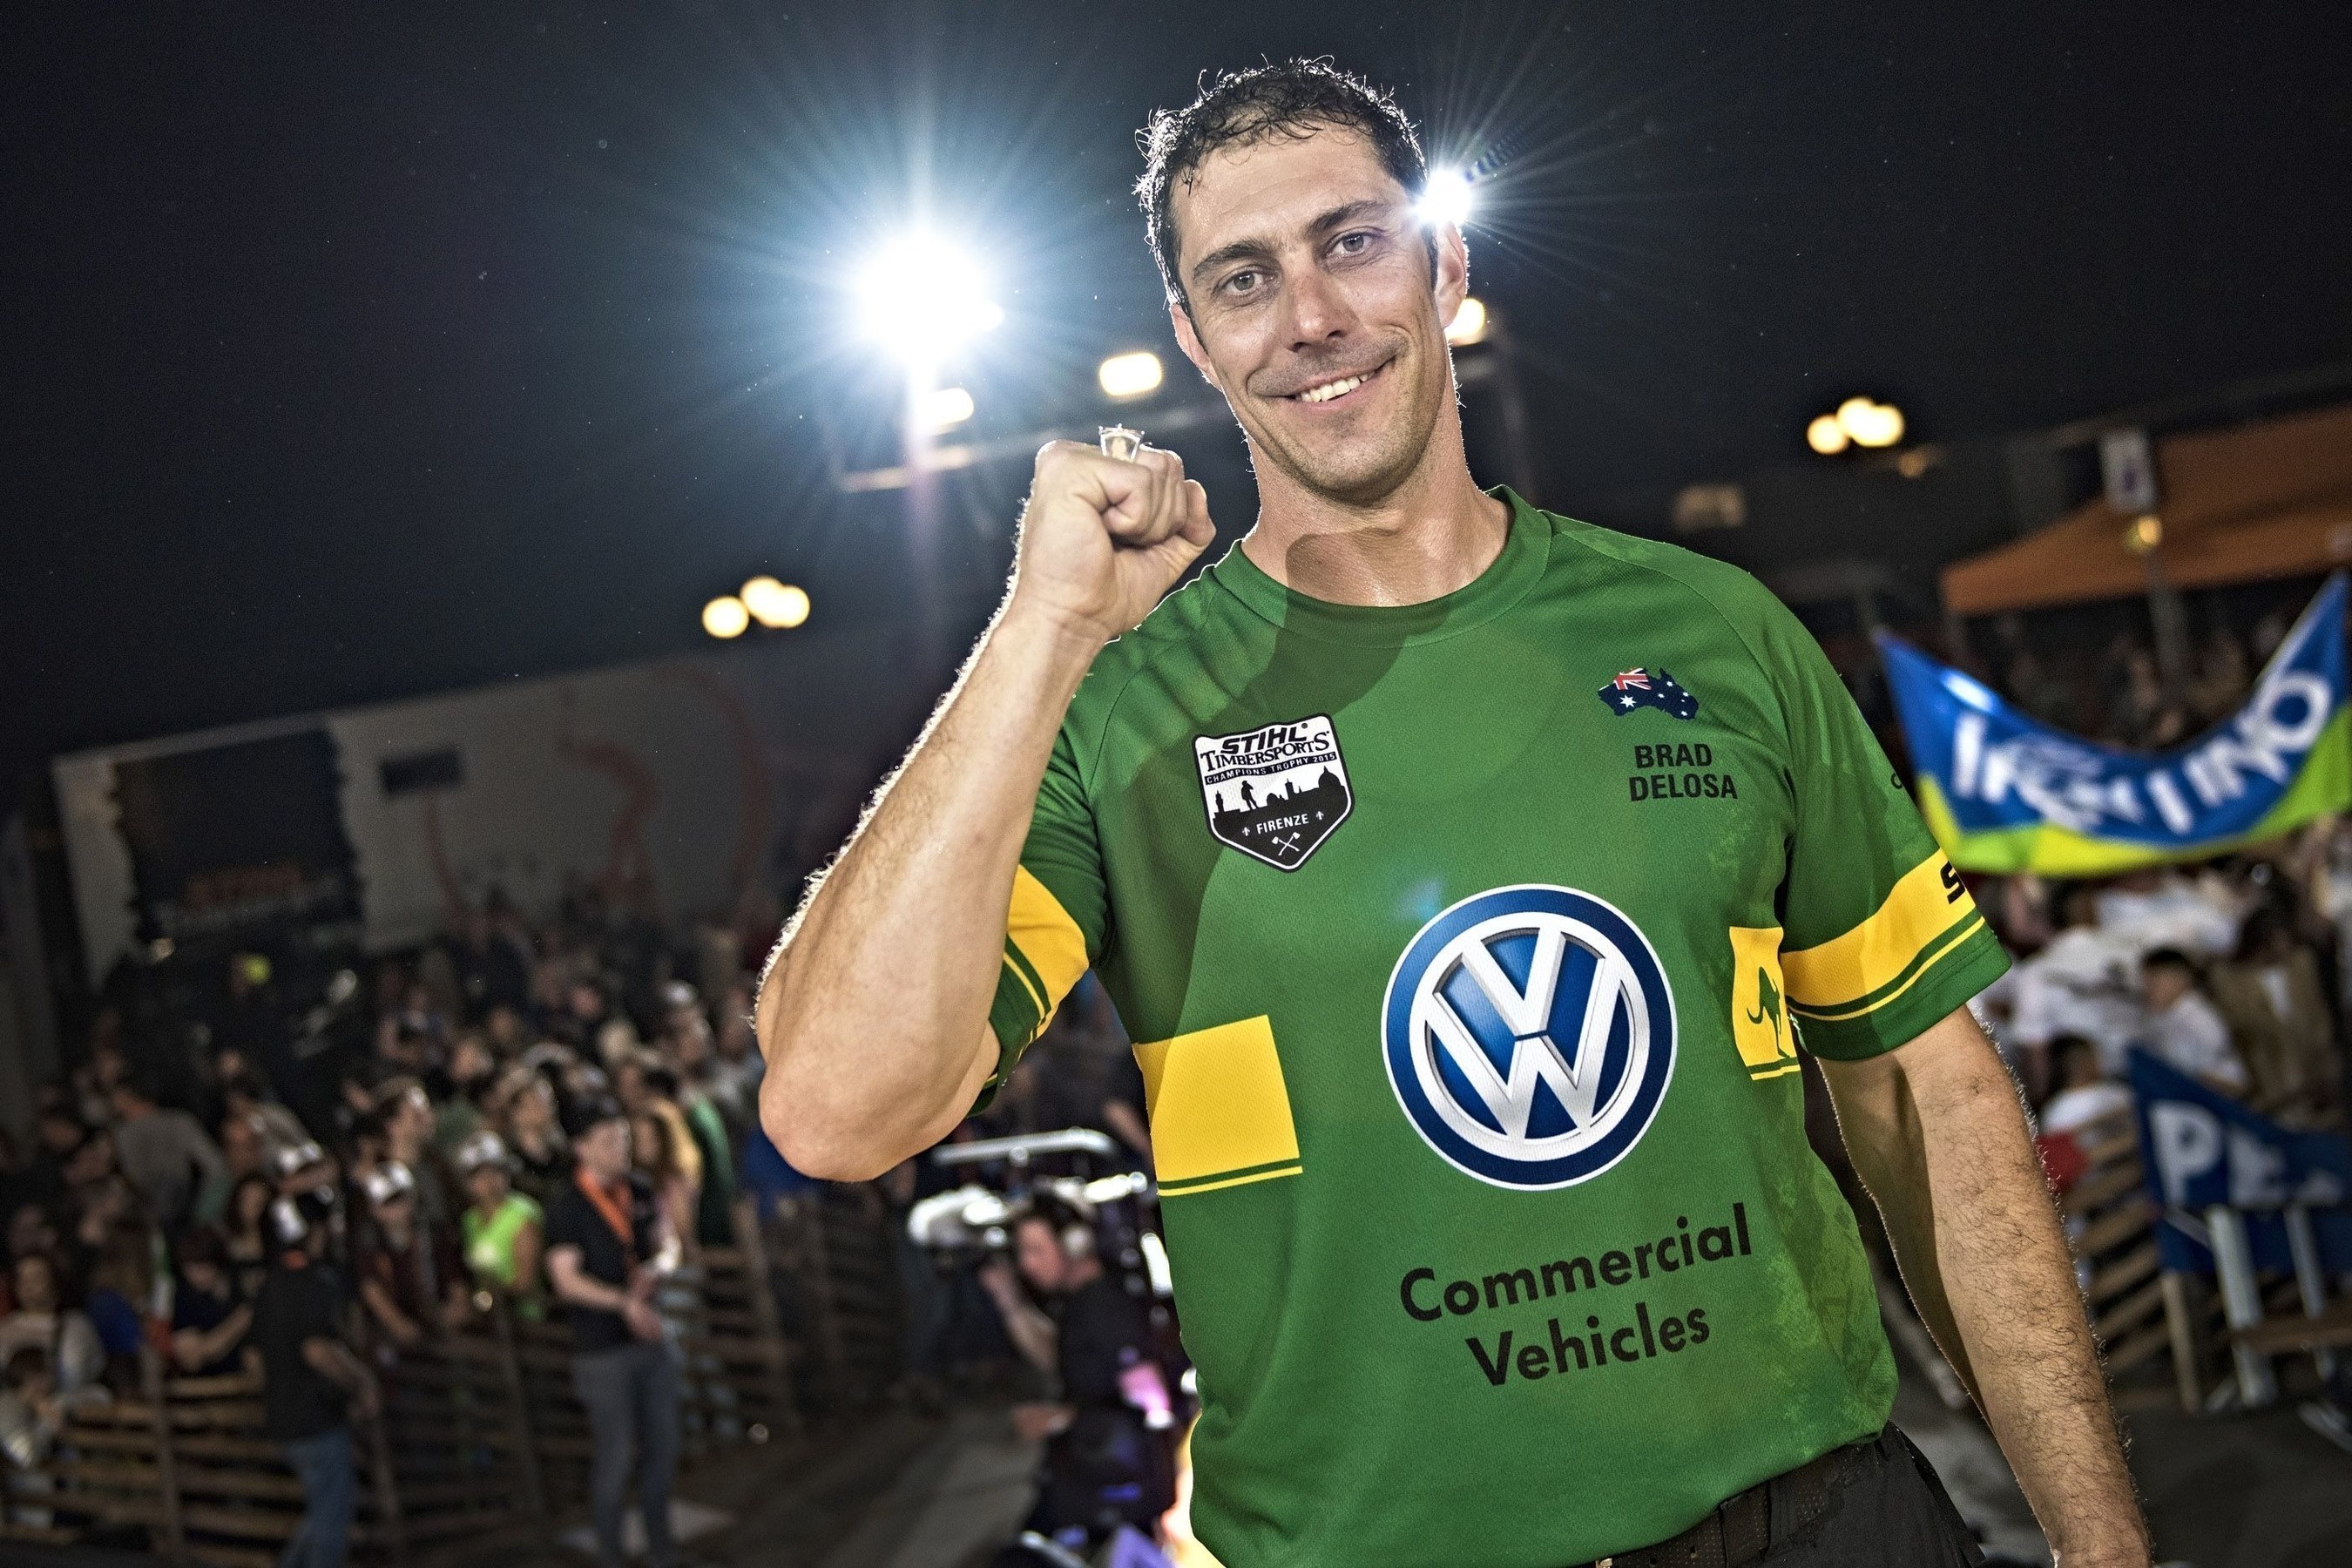 2015 Champions Trophy in Florence, Italy - "and the winner is...": Brad Delosa of Australia. (PRNewsFoto/STIHL TIMBERSPORTS Series) (PRNewsFoto/STIHL TIMBERSPORTS Series)